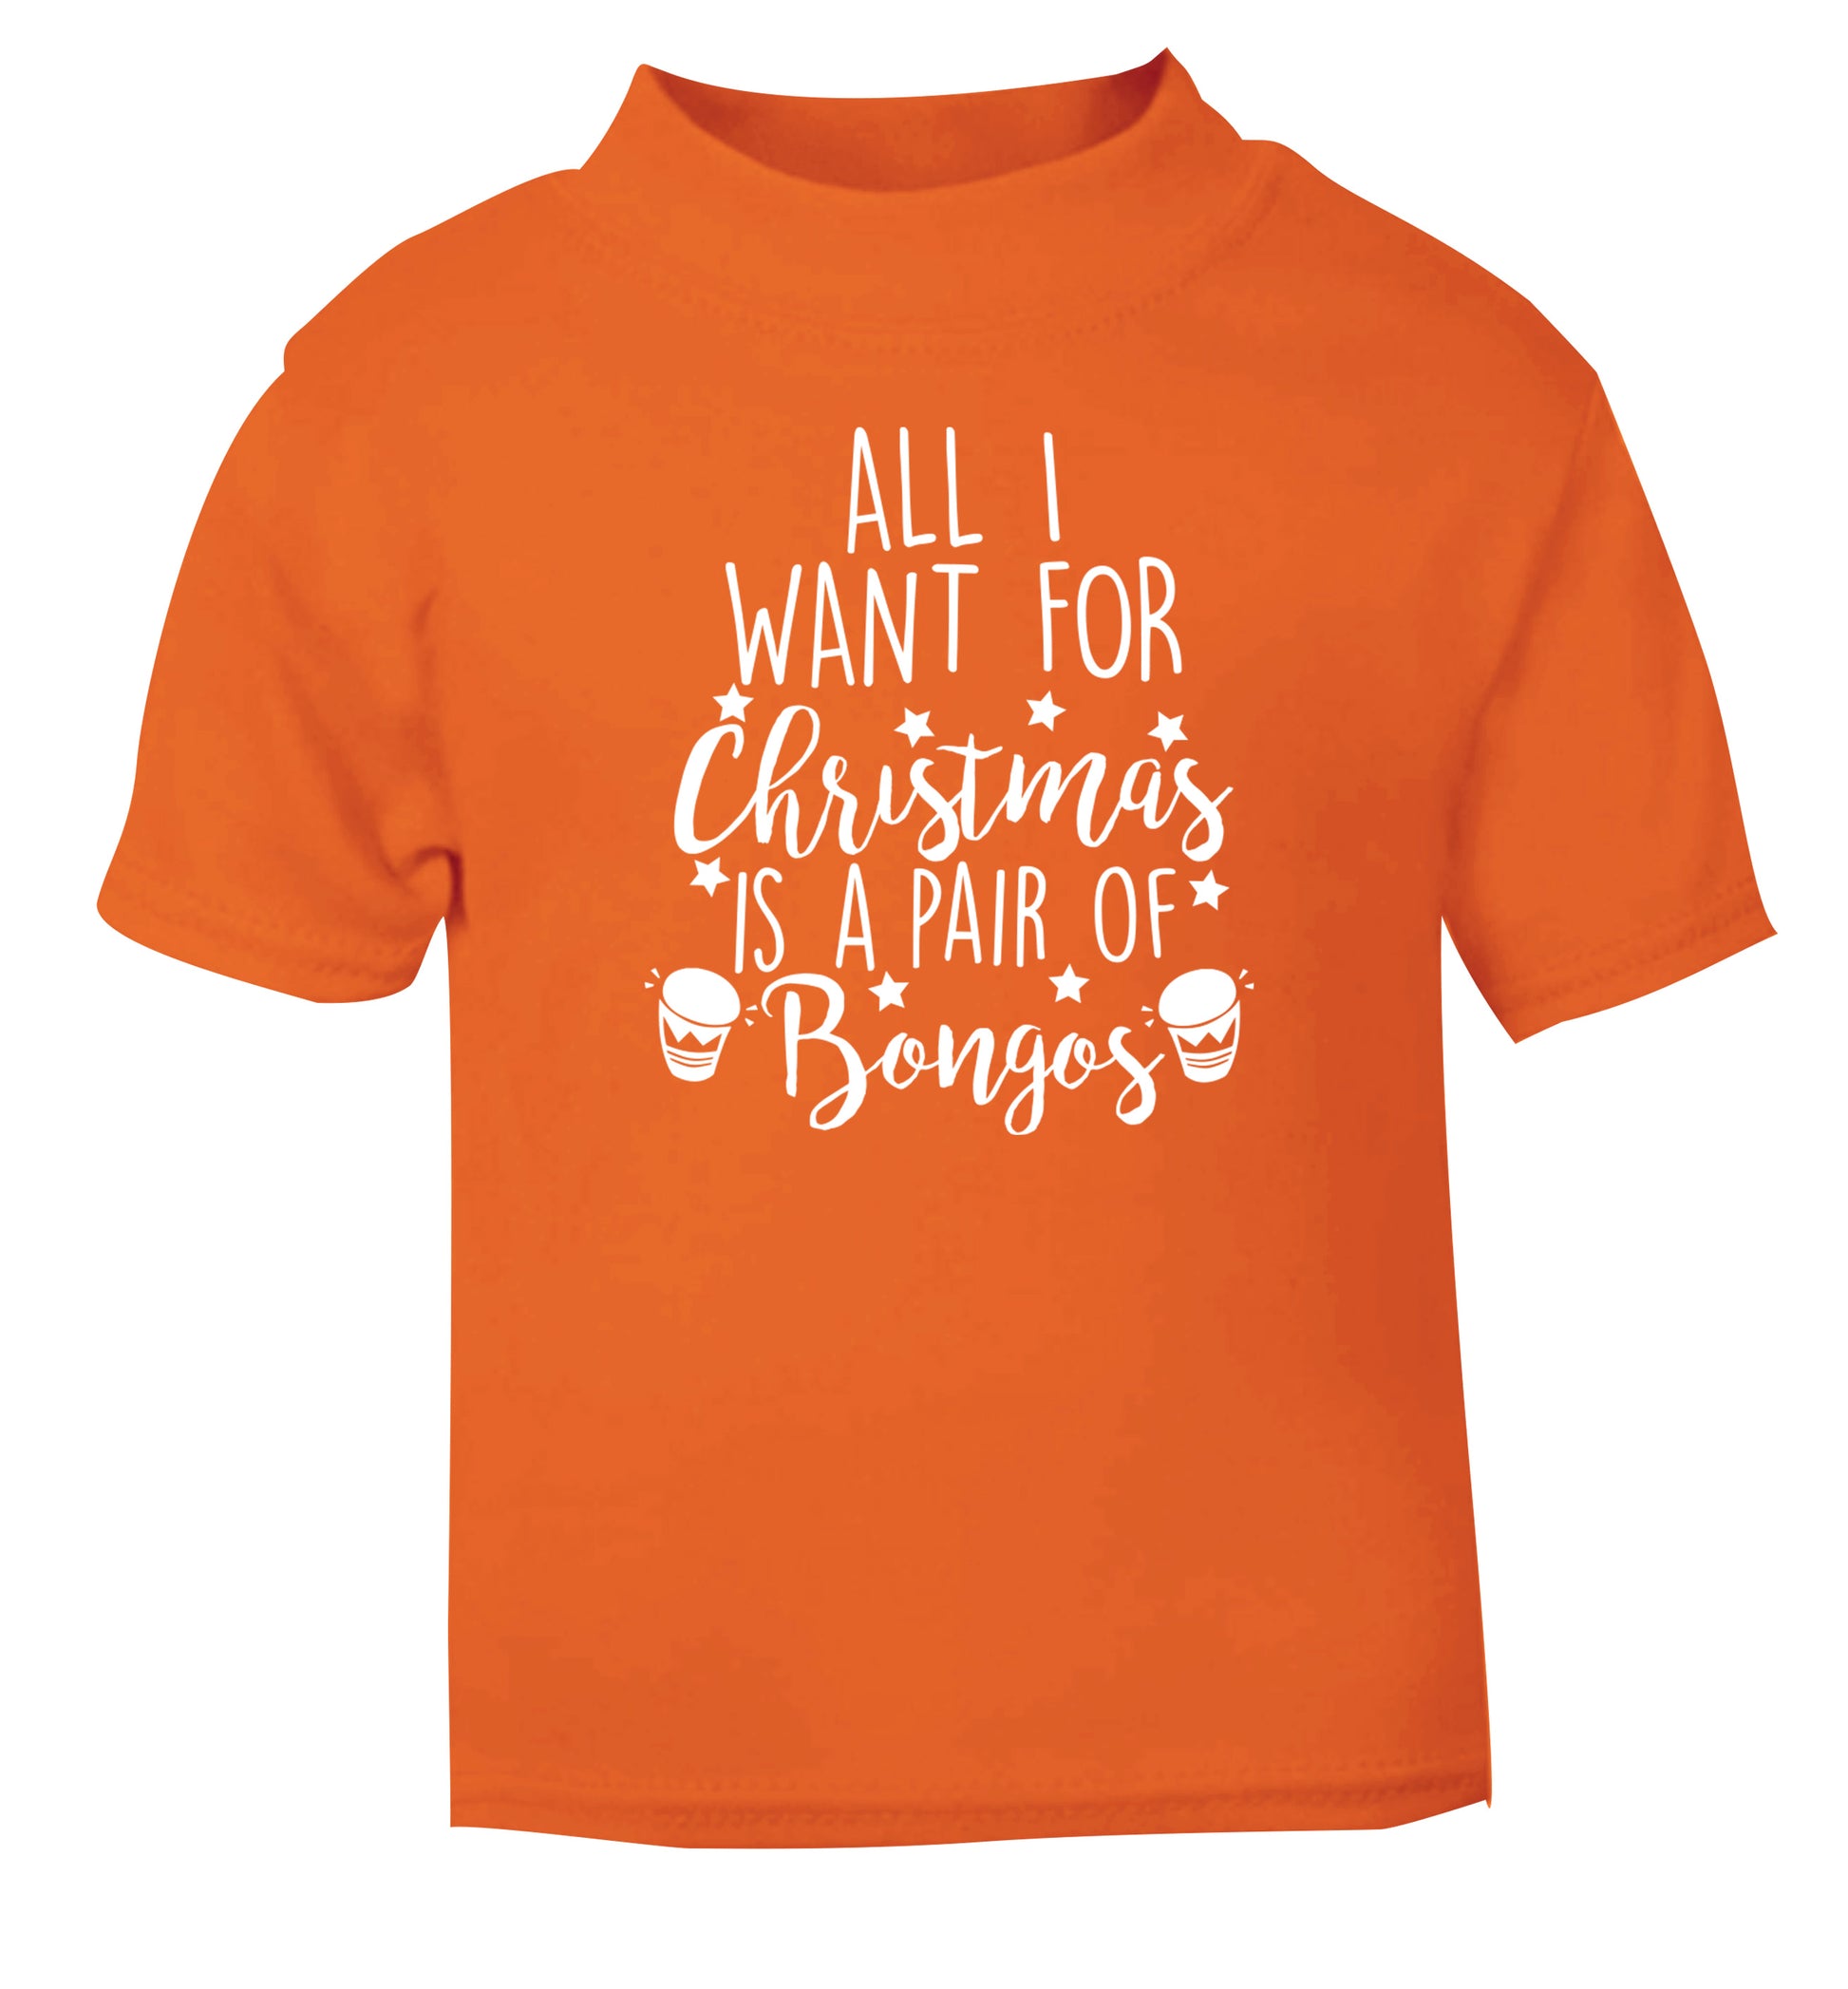 All I want for Christmas is a pair of bongos! orange Baby Toddler Tshirt 2 Years